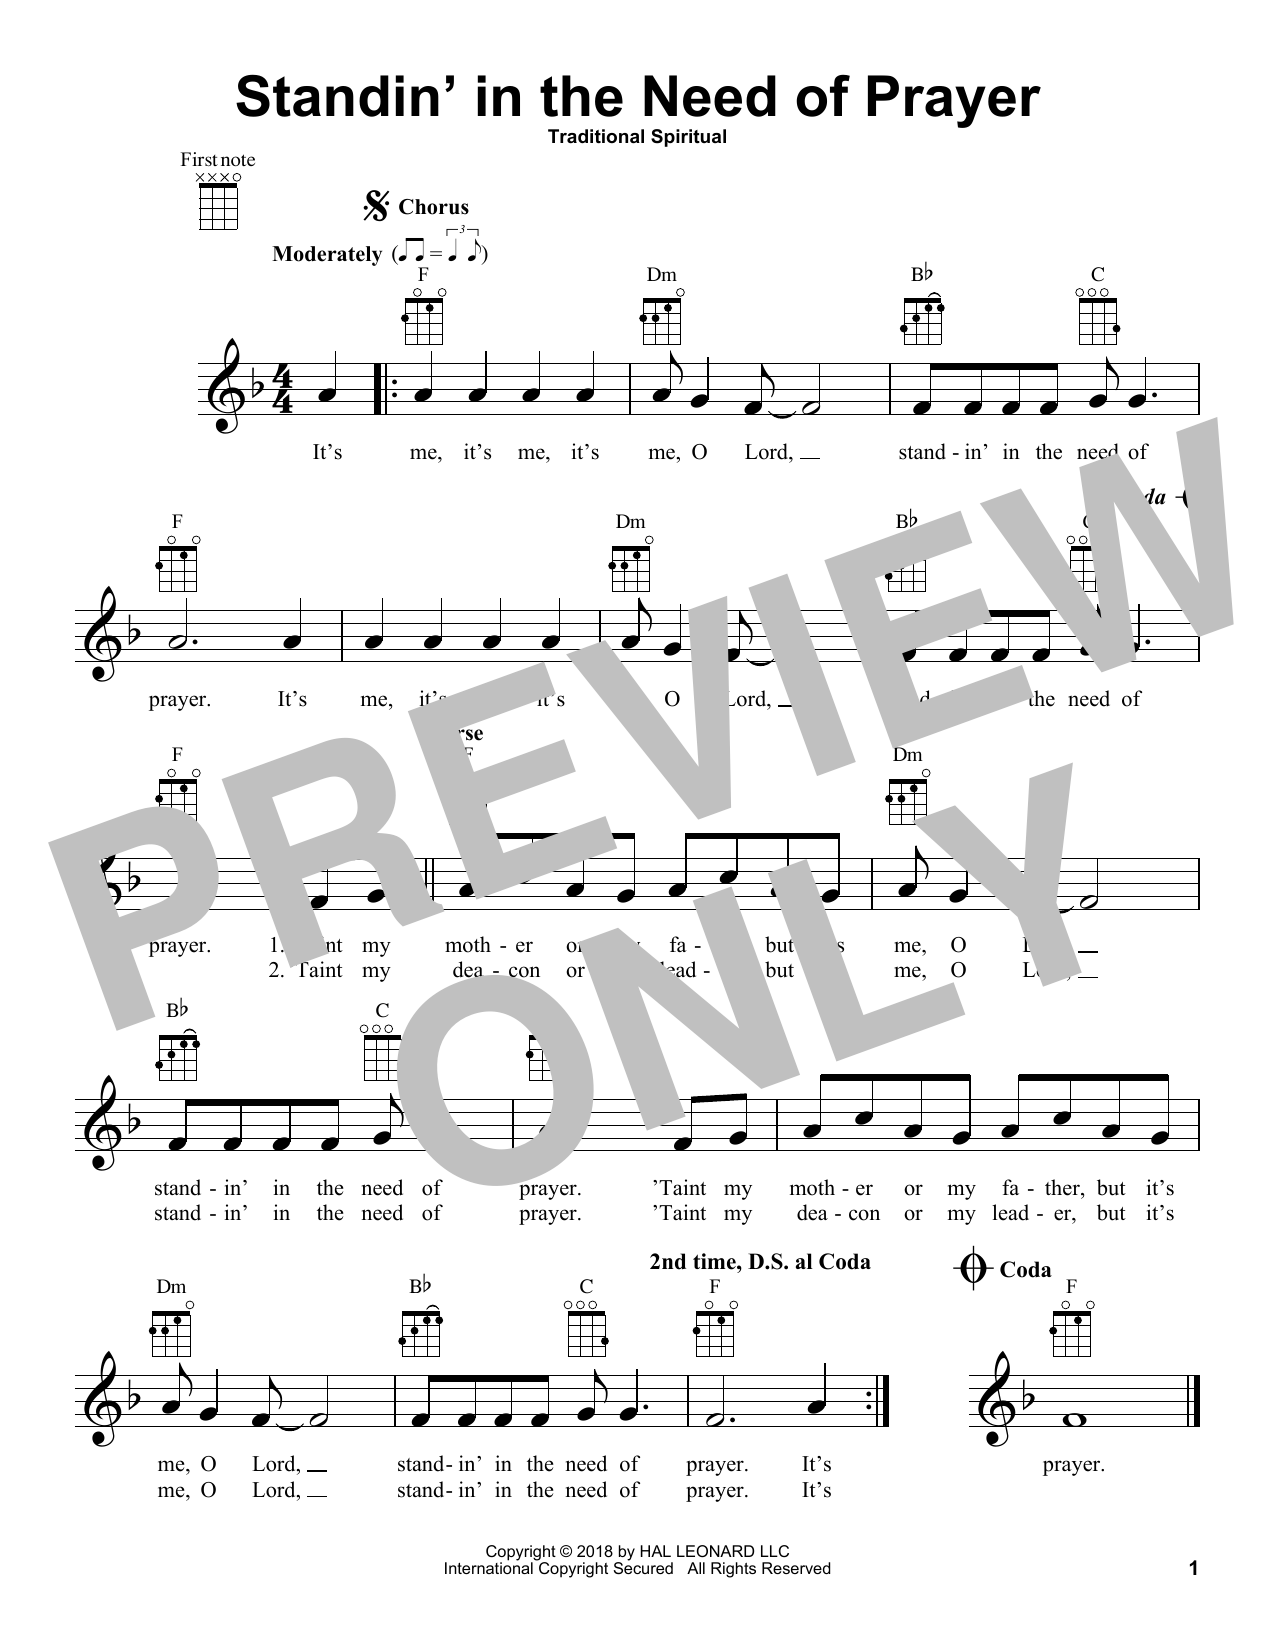 Download Traditional Spiritual Standin' In The Need Of Prayer Sheet Music